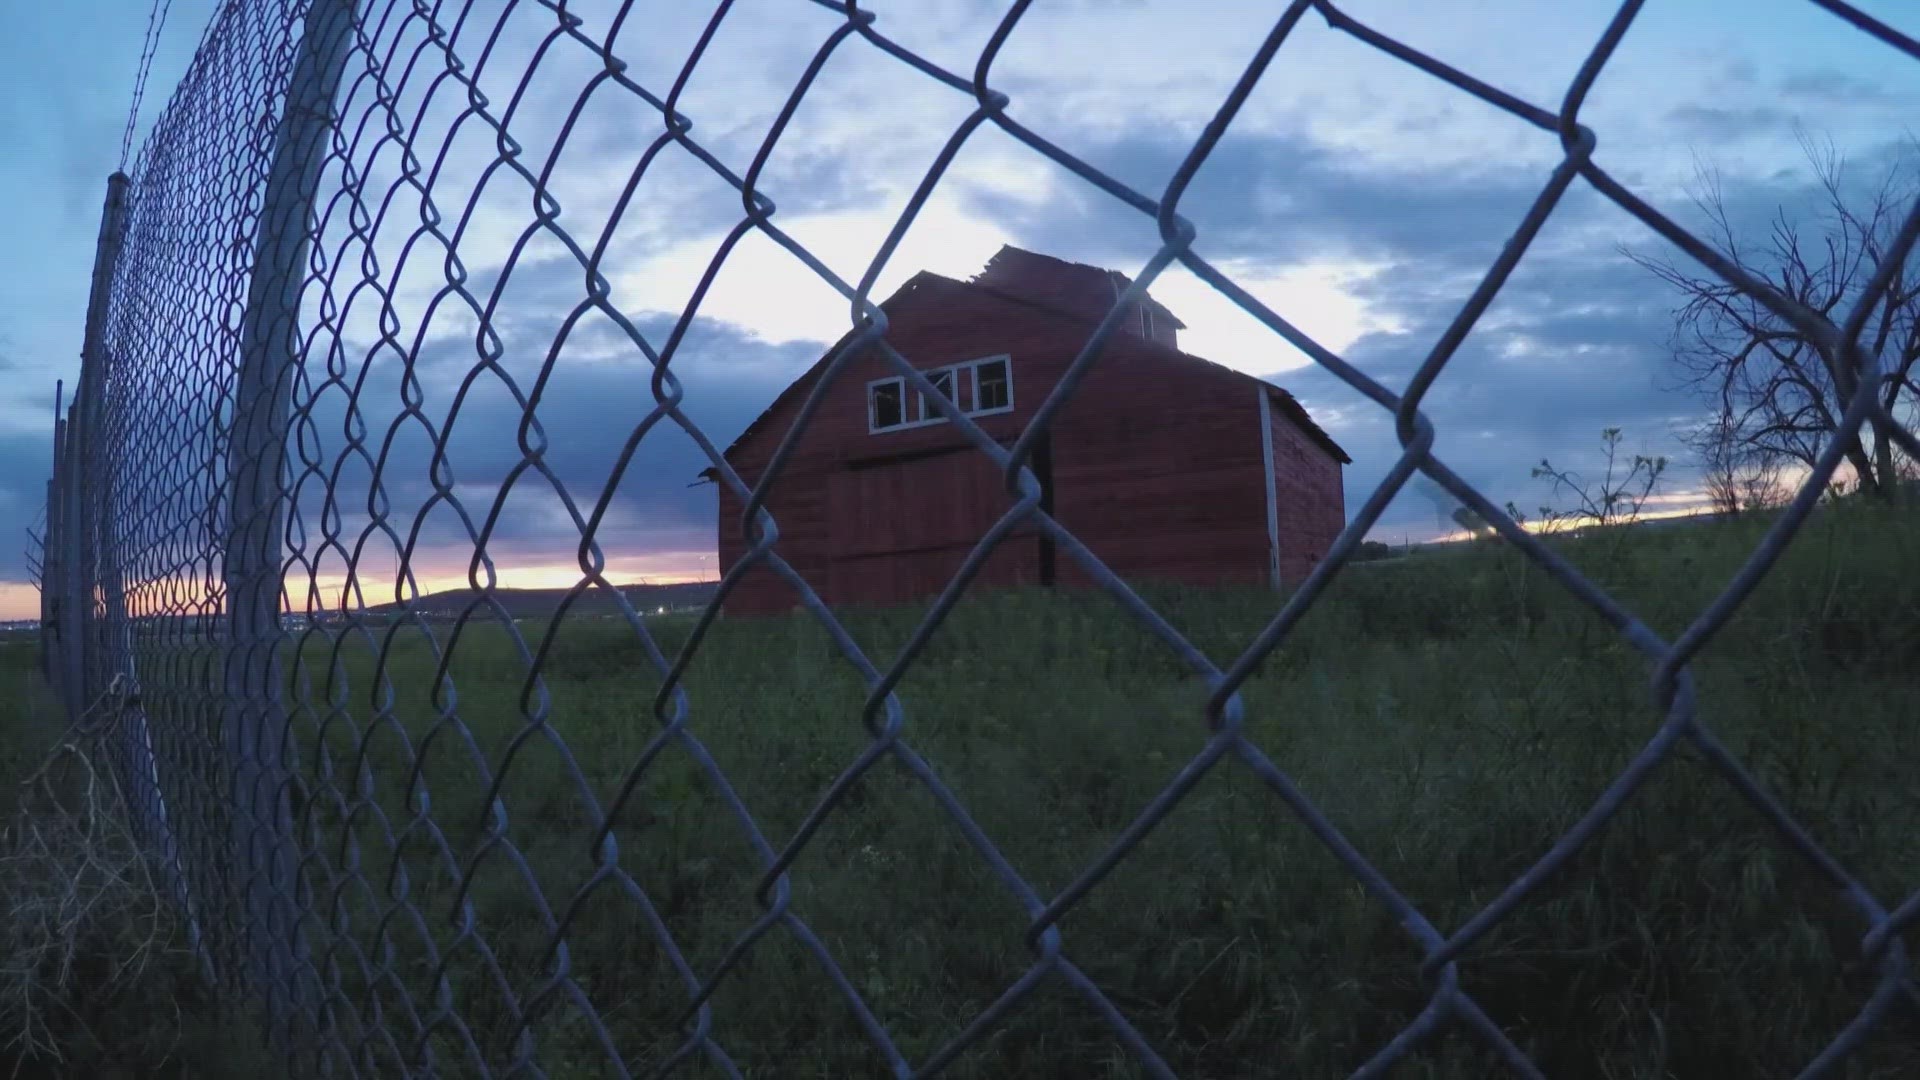 An old red barn by Denver’s bustling airport scene has managed to remain standing since the early 1900s.